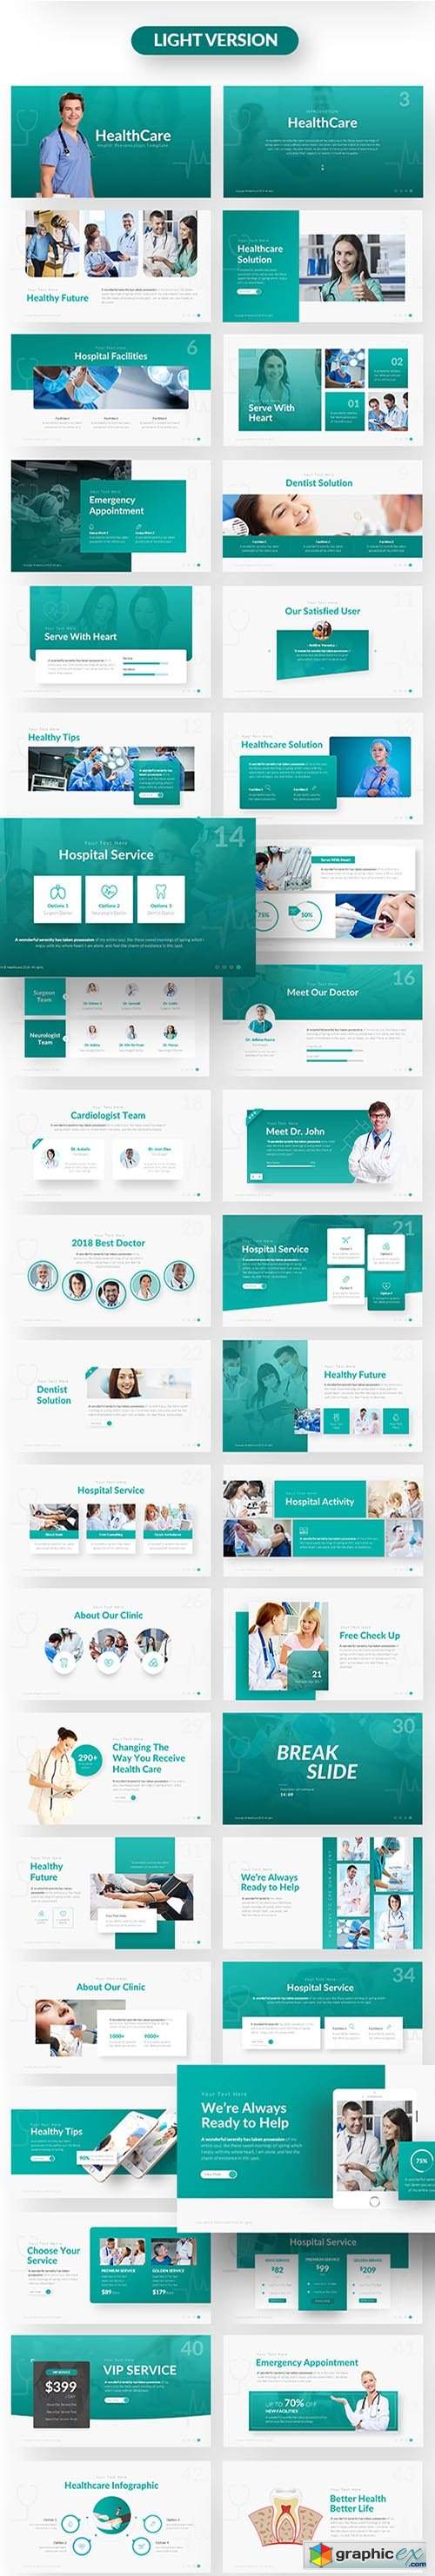 HealthCare Medical PowerPoint Presentation Template